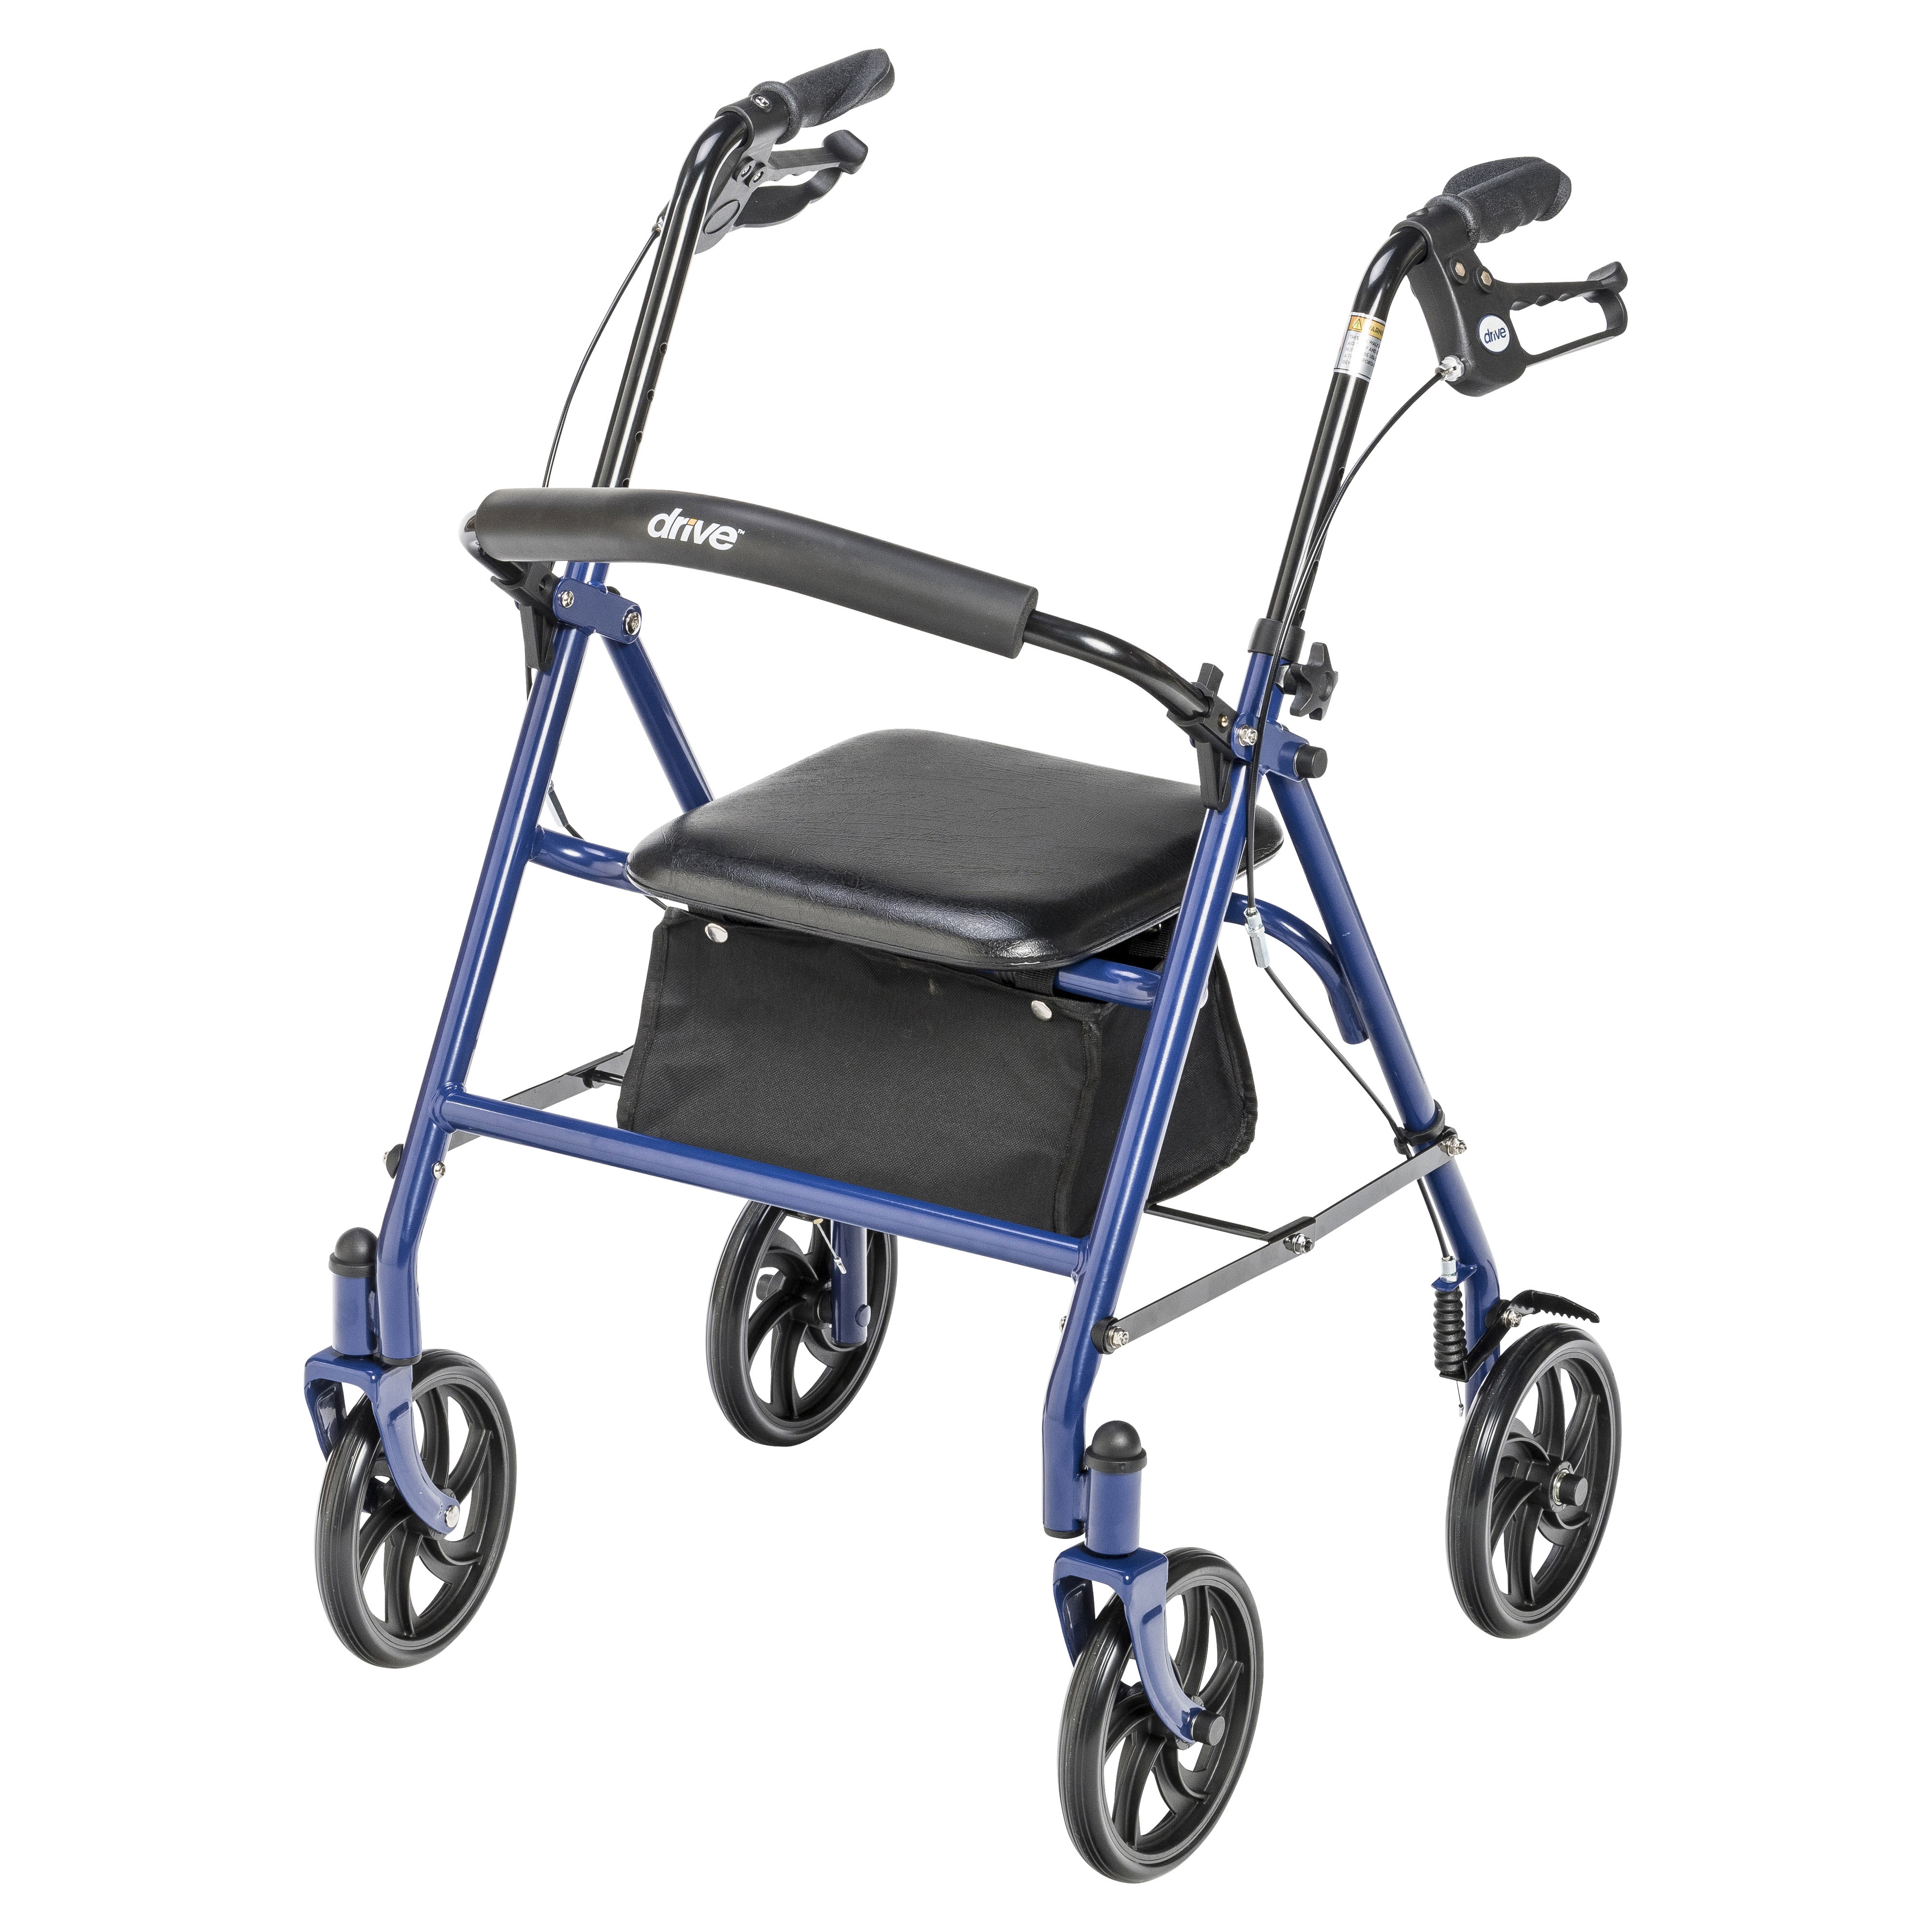 Drive Medical Four Wheel Rollator Rolling Walker with Fold Up Removable Back Support, Blue - image 2 of 9